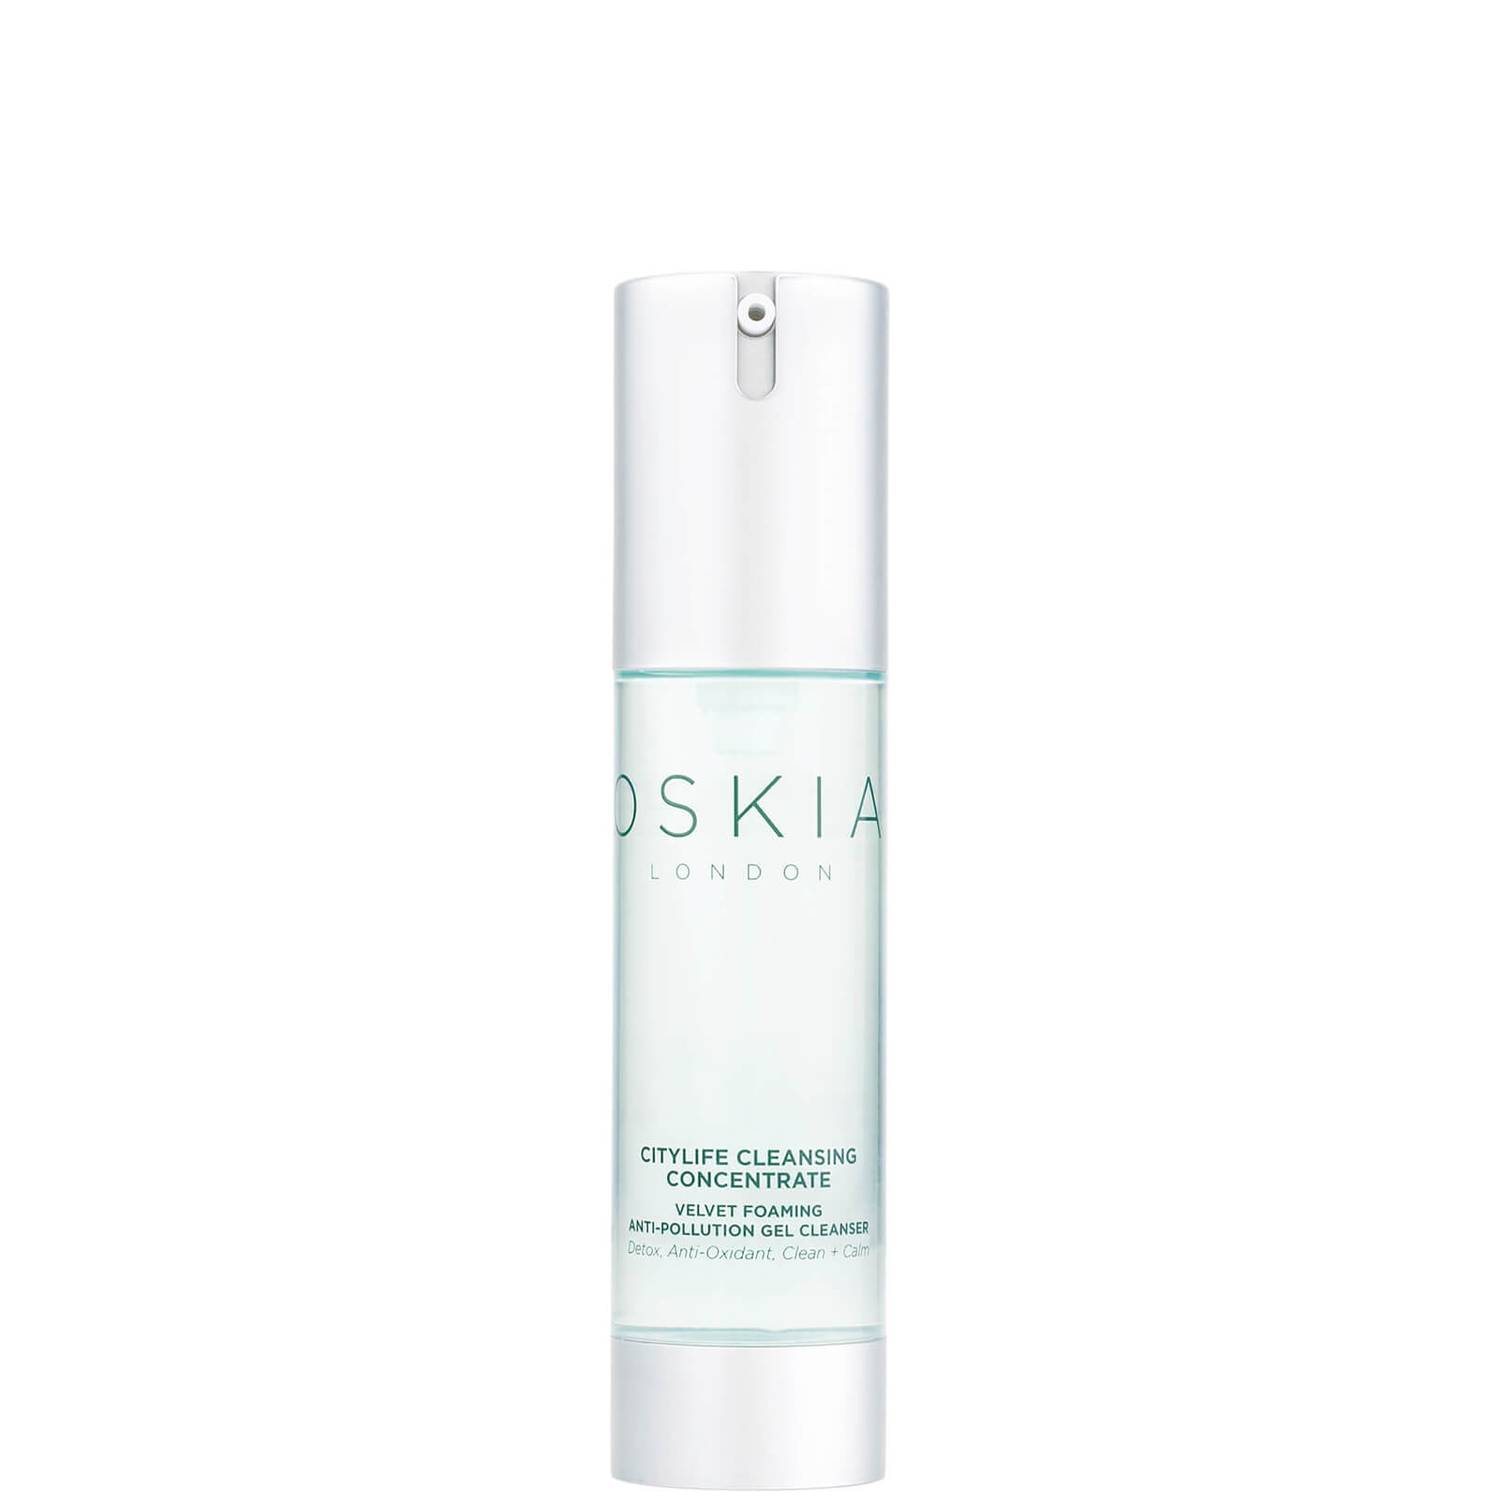 OSKIA Citylife Cleansing Concentrate image